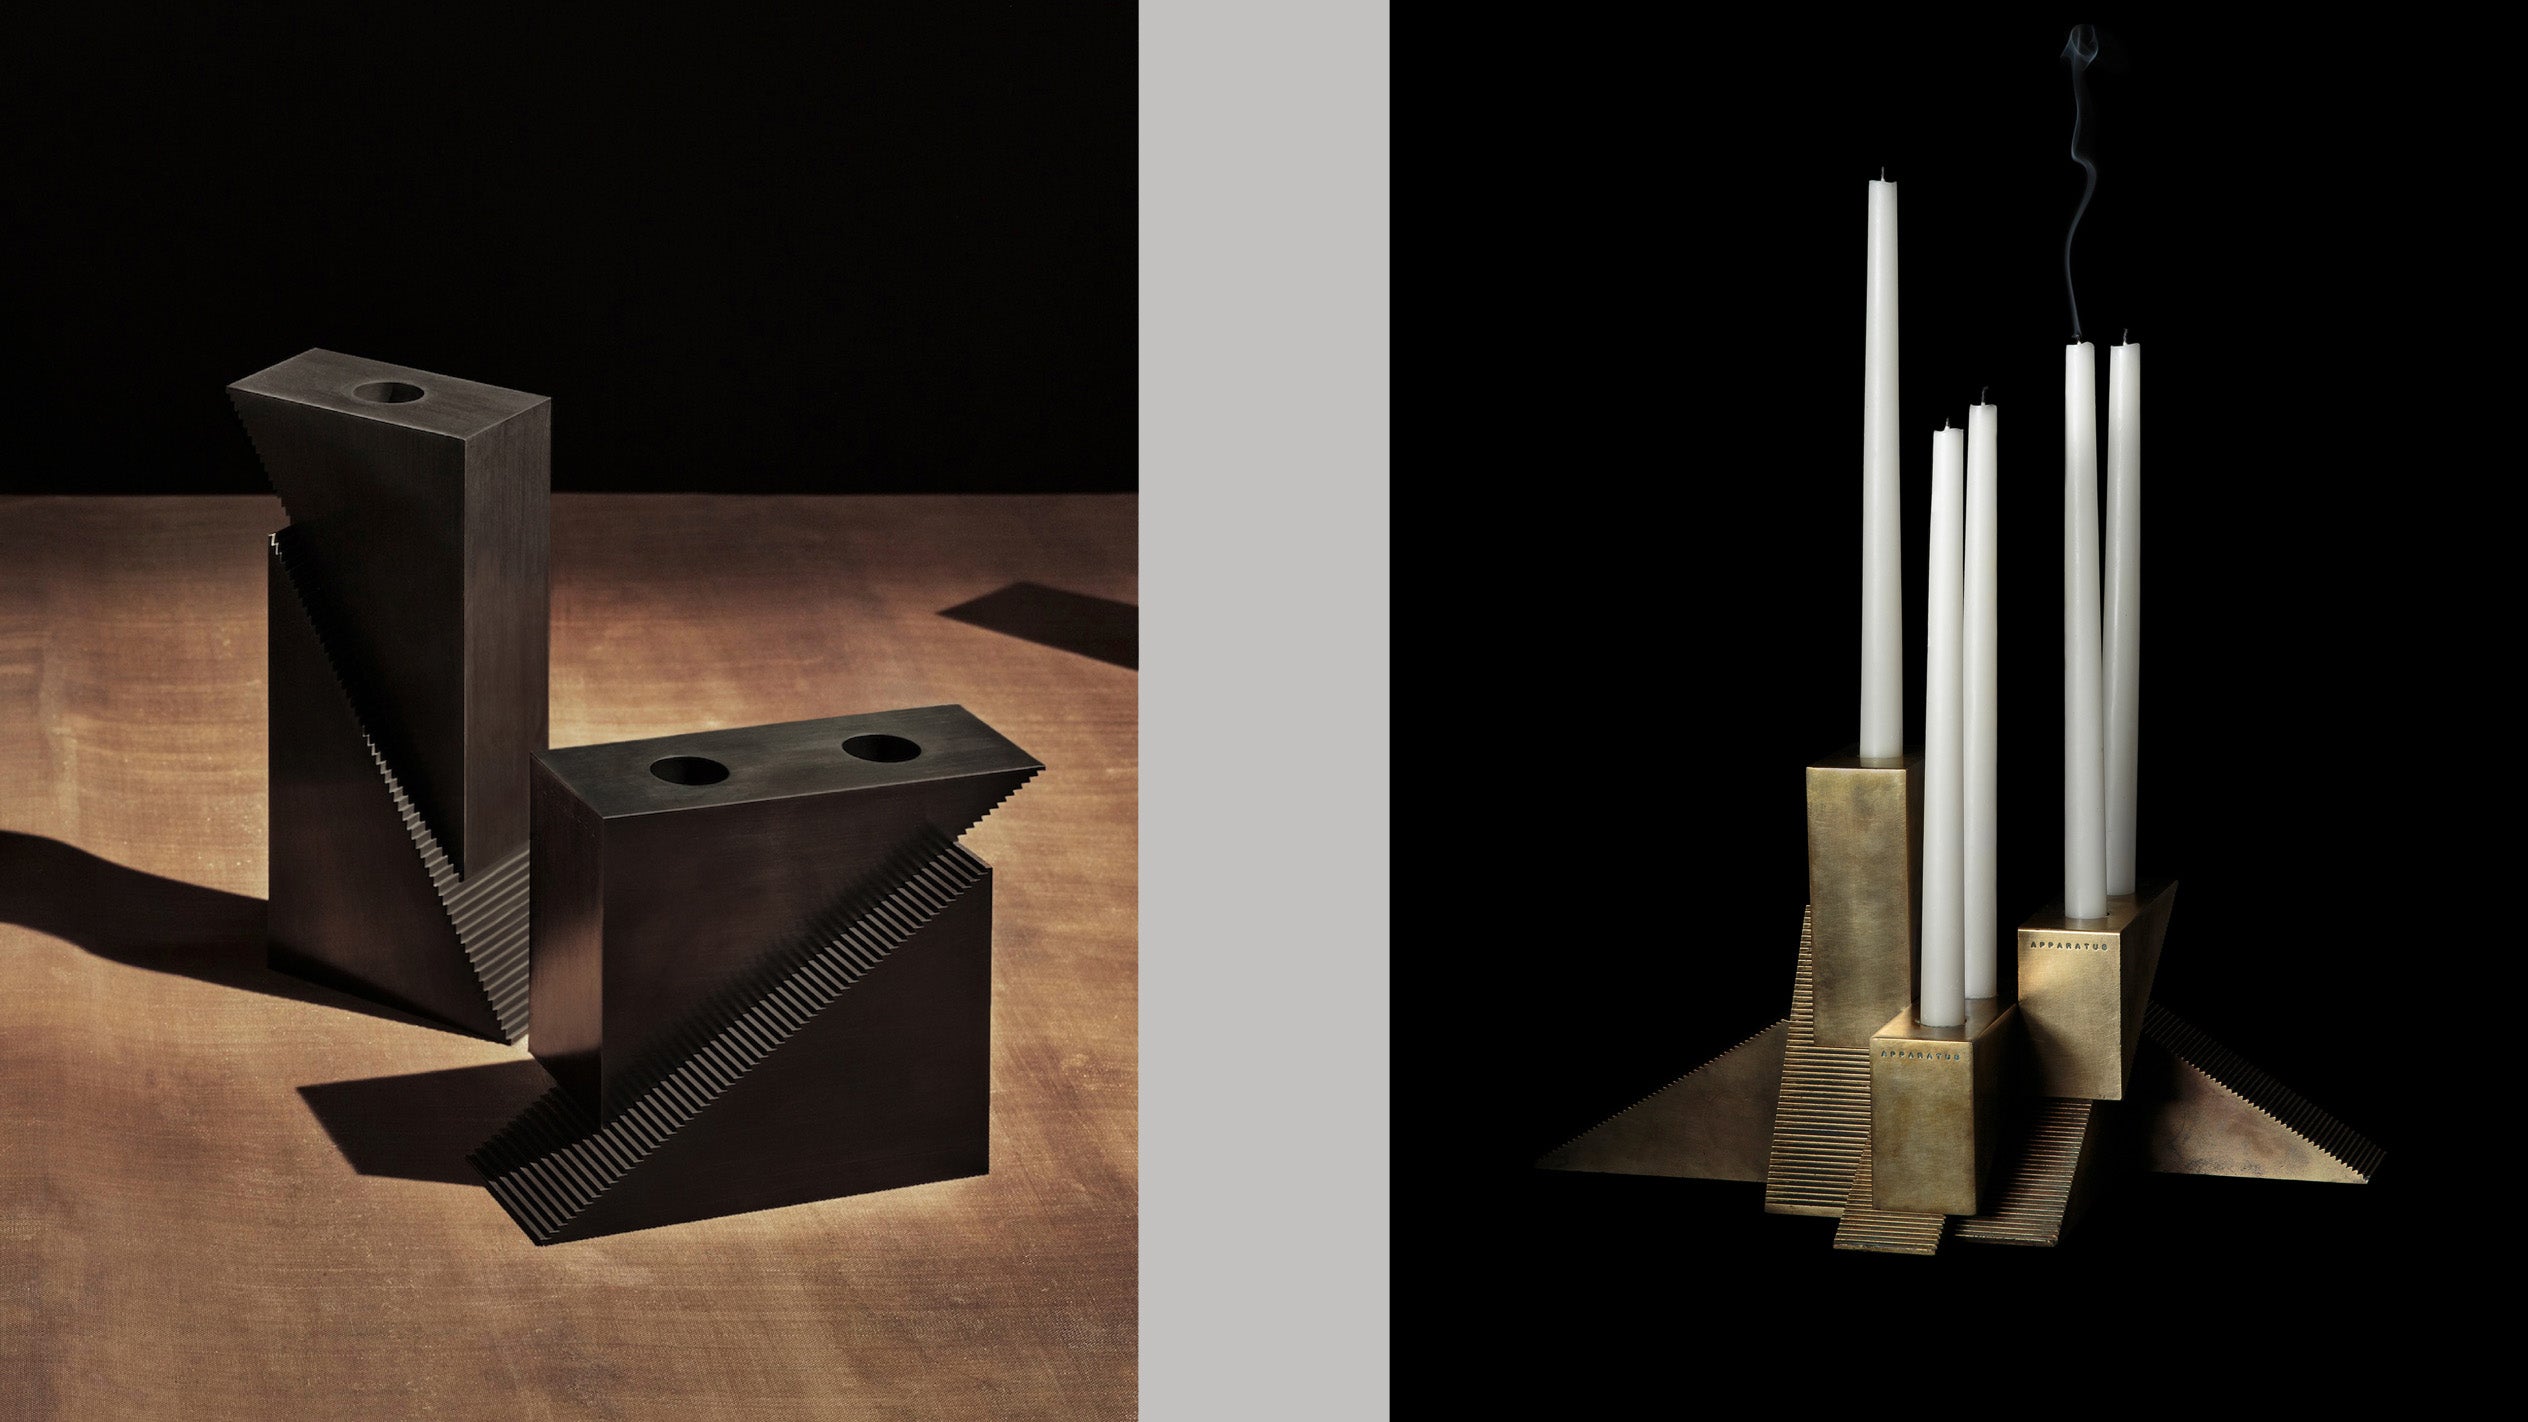 A pair of CANDLE BLOCKS in Blackened Brass finish on a wooden surface alongside an image of a trio of Aged Brass CANDLE BLOCKS with white candlesticks.